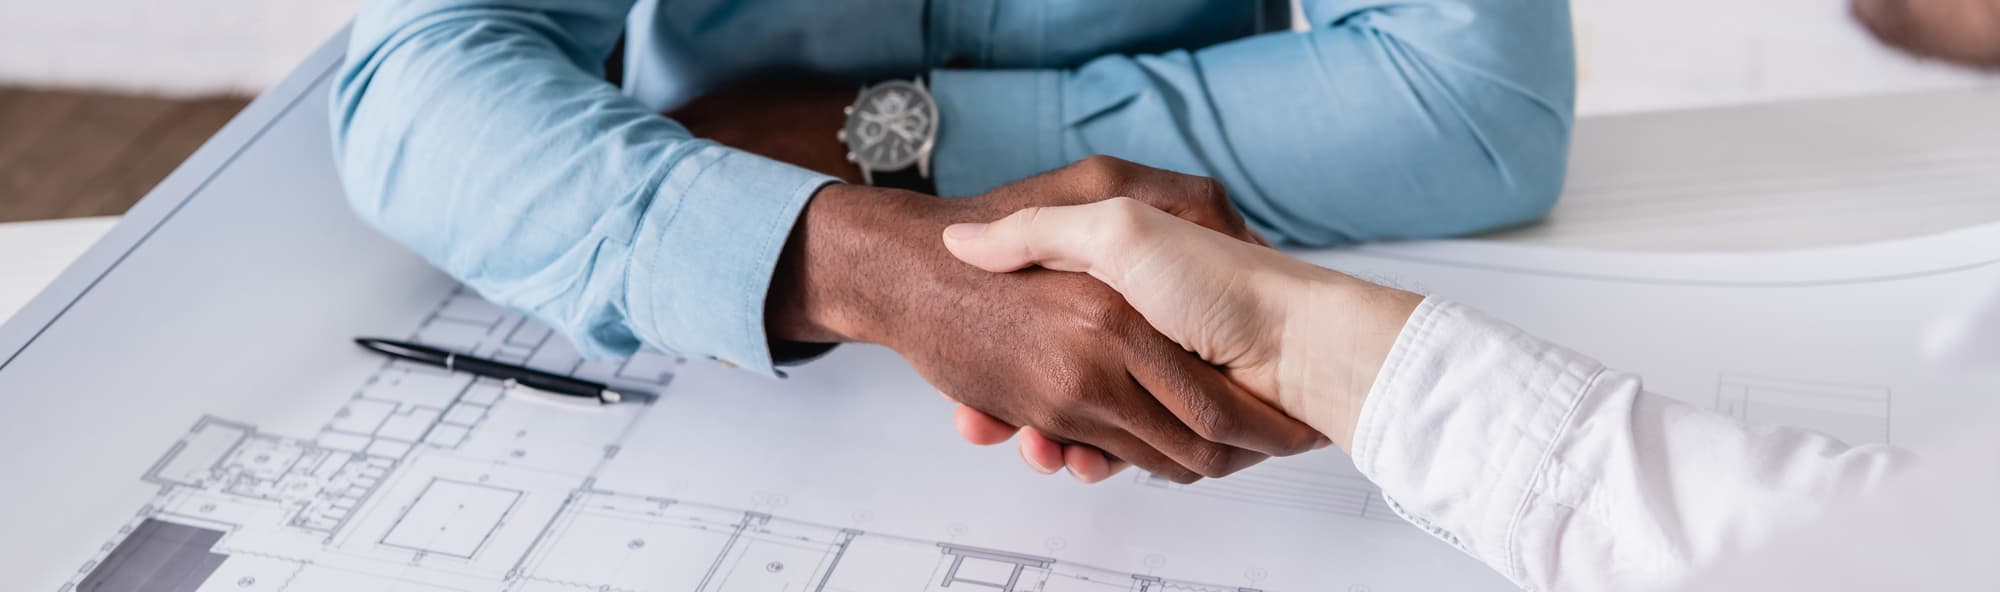 How to Build Real Estate Ancillary Service Partnerships